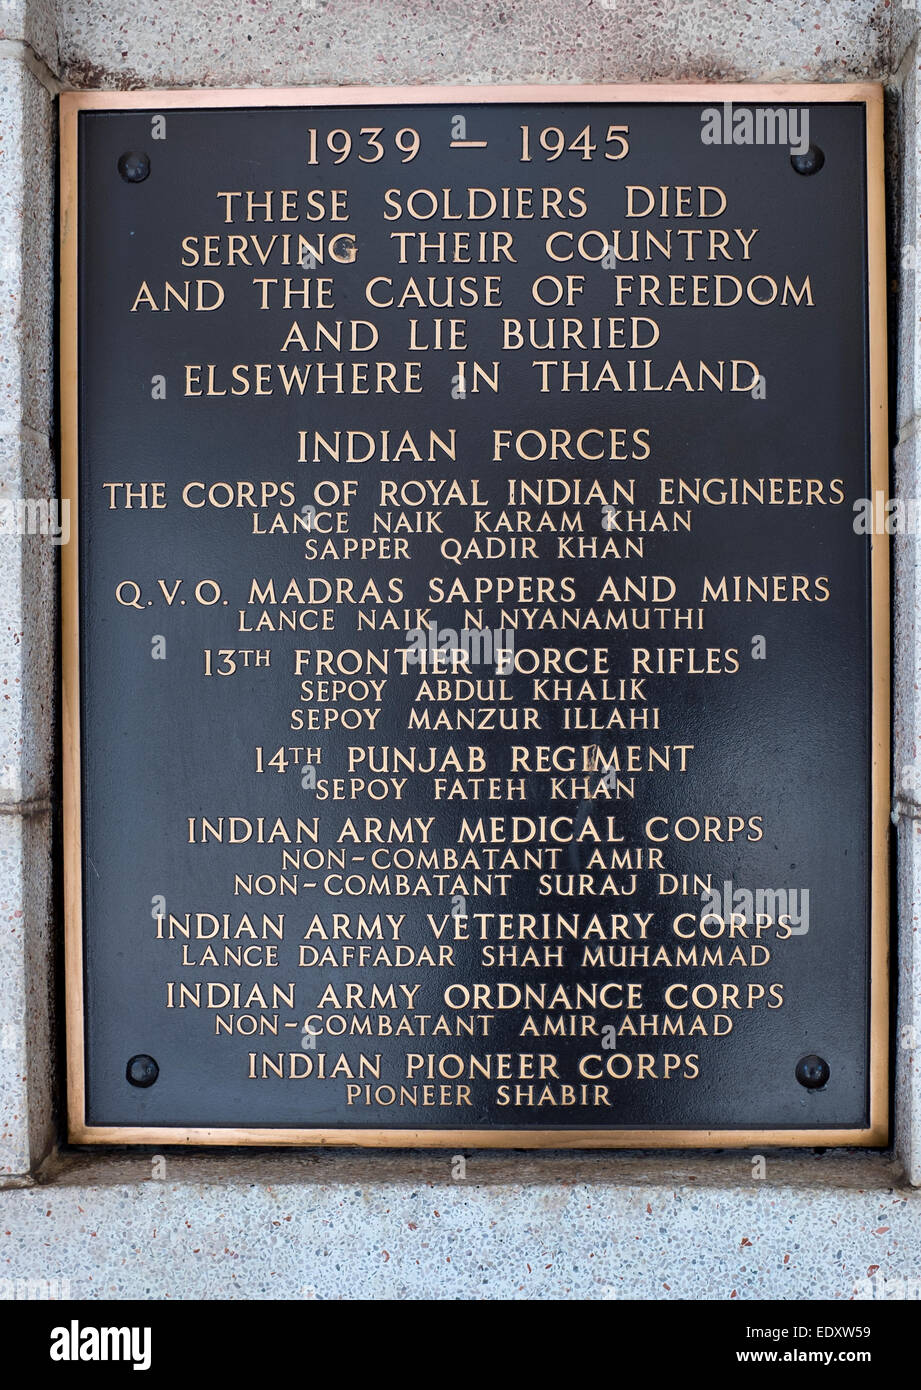 Indian Forces Memorial Plaque at the Kanchanaburil War Cemetery Stock Photo